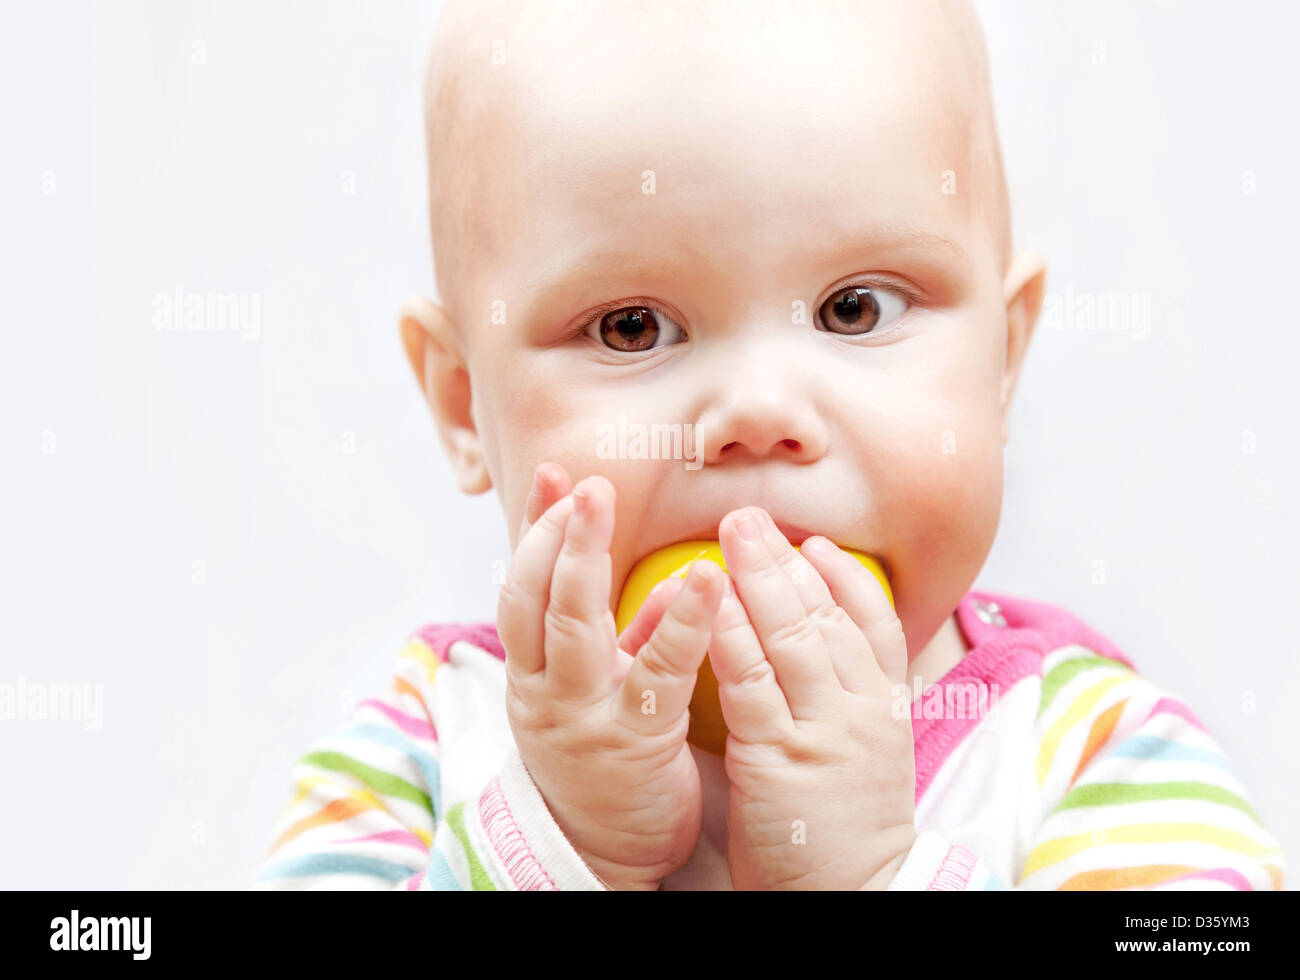 little baby chews on a wooden apple toy Stock Photo